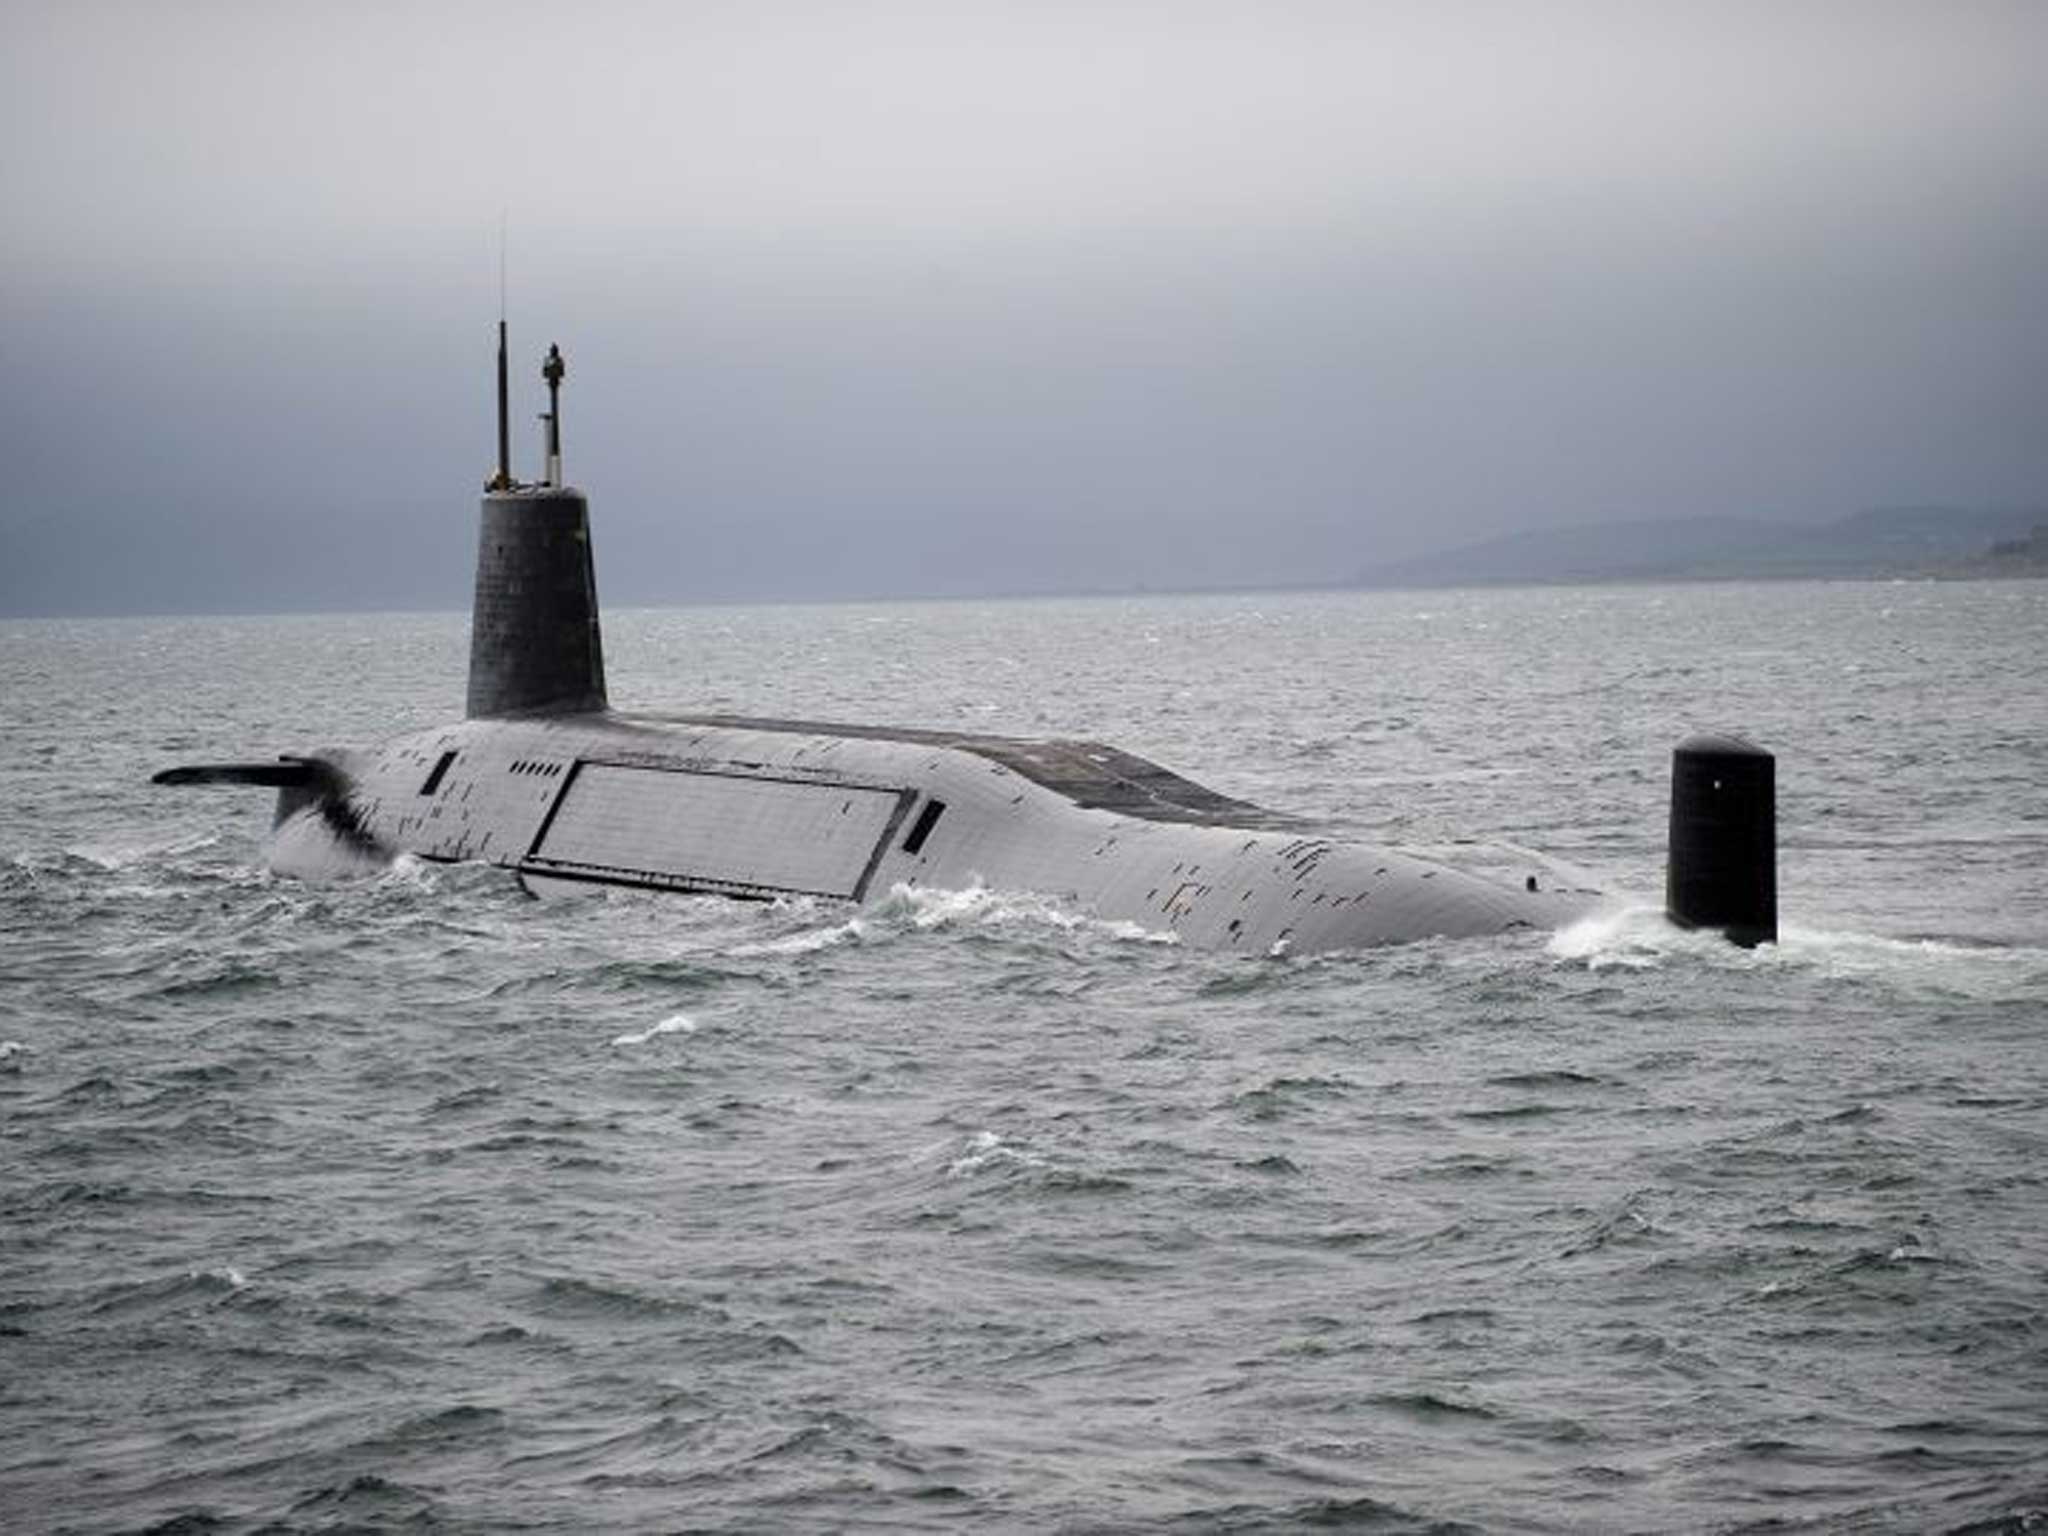 Low-level nuclear waste is proposed to be removed from a total of 15 retired submarines at Rosyth and Devonport